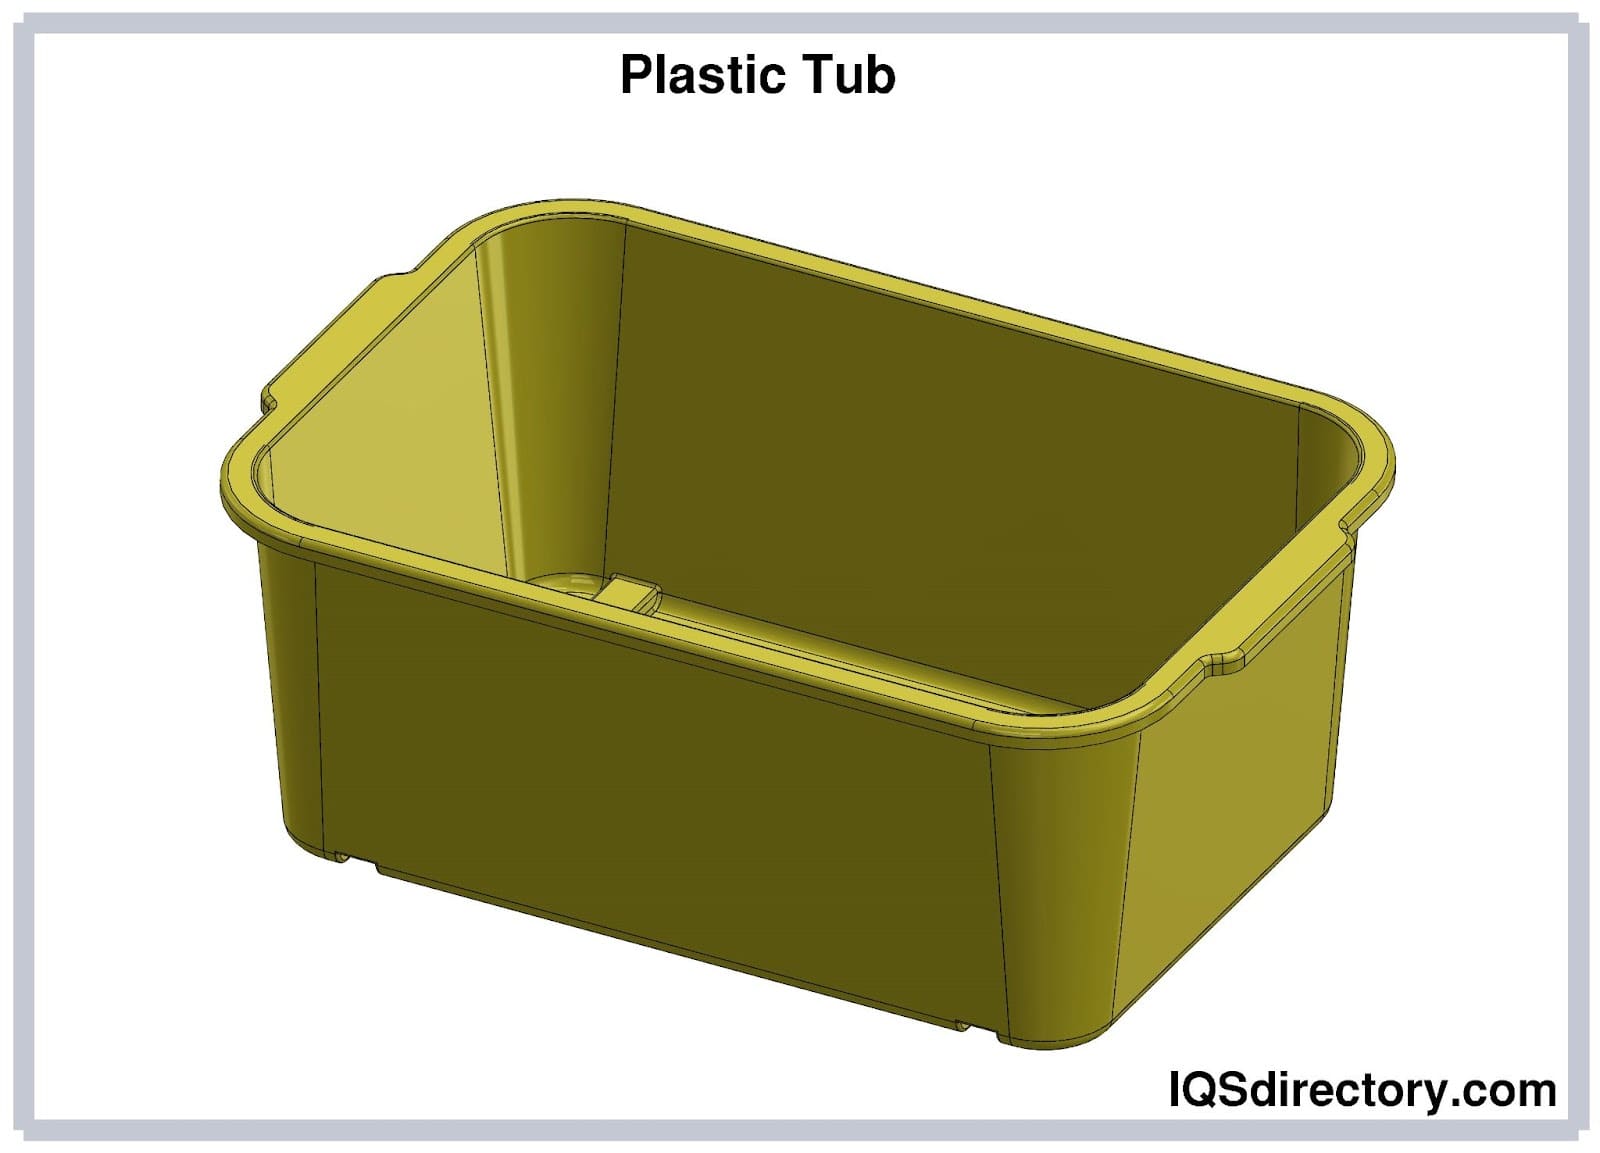 https://www.plastic-containers.net/wp-content/uploads/2022/11/plastic-tubs.jpg